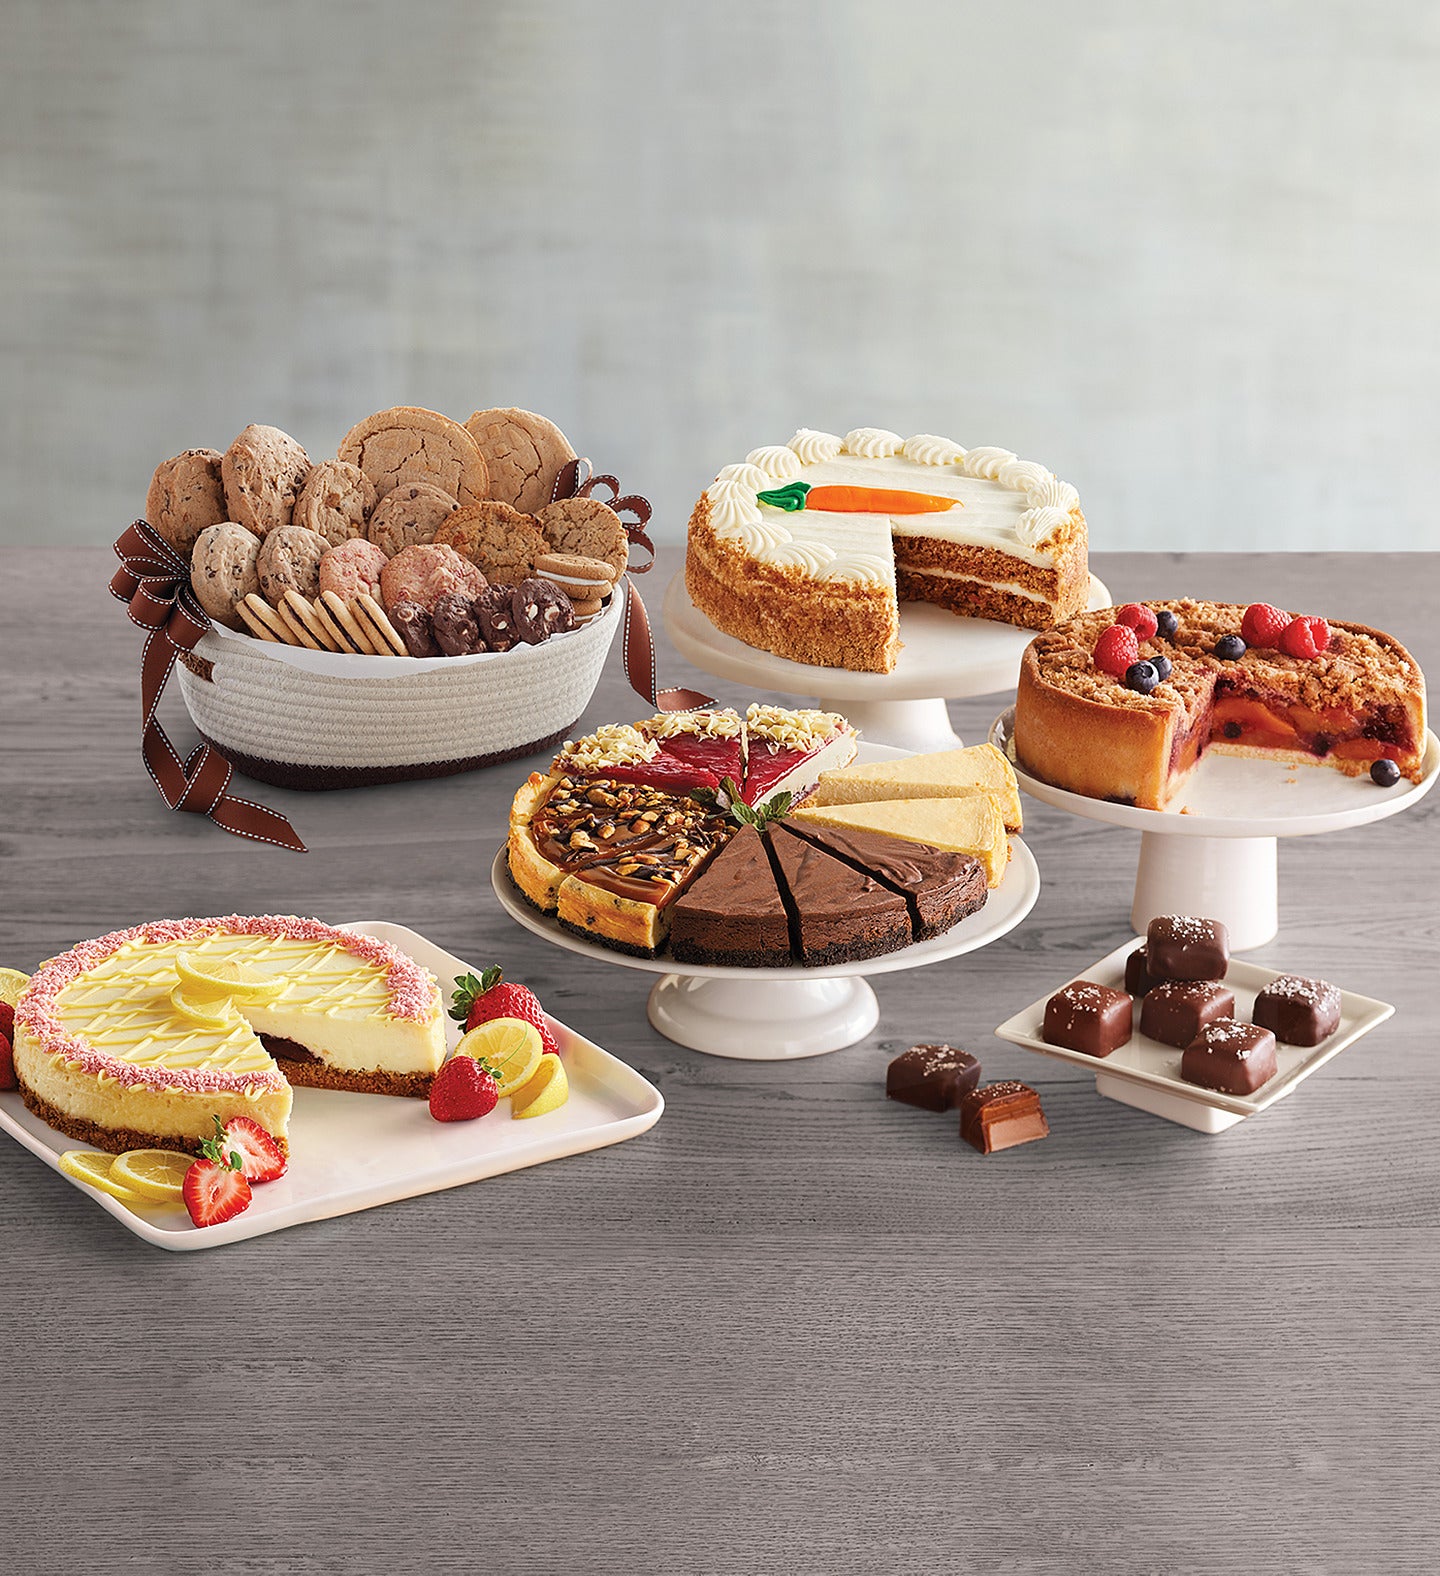 Dessert of the Month Club® Collection